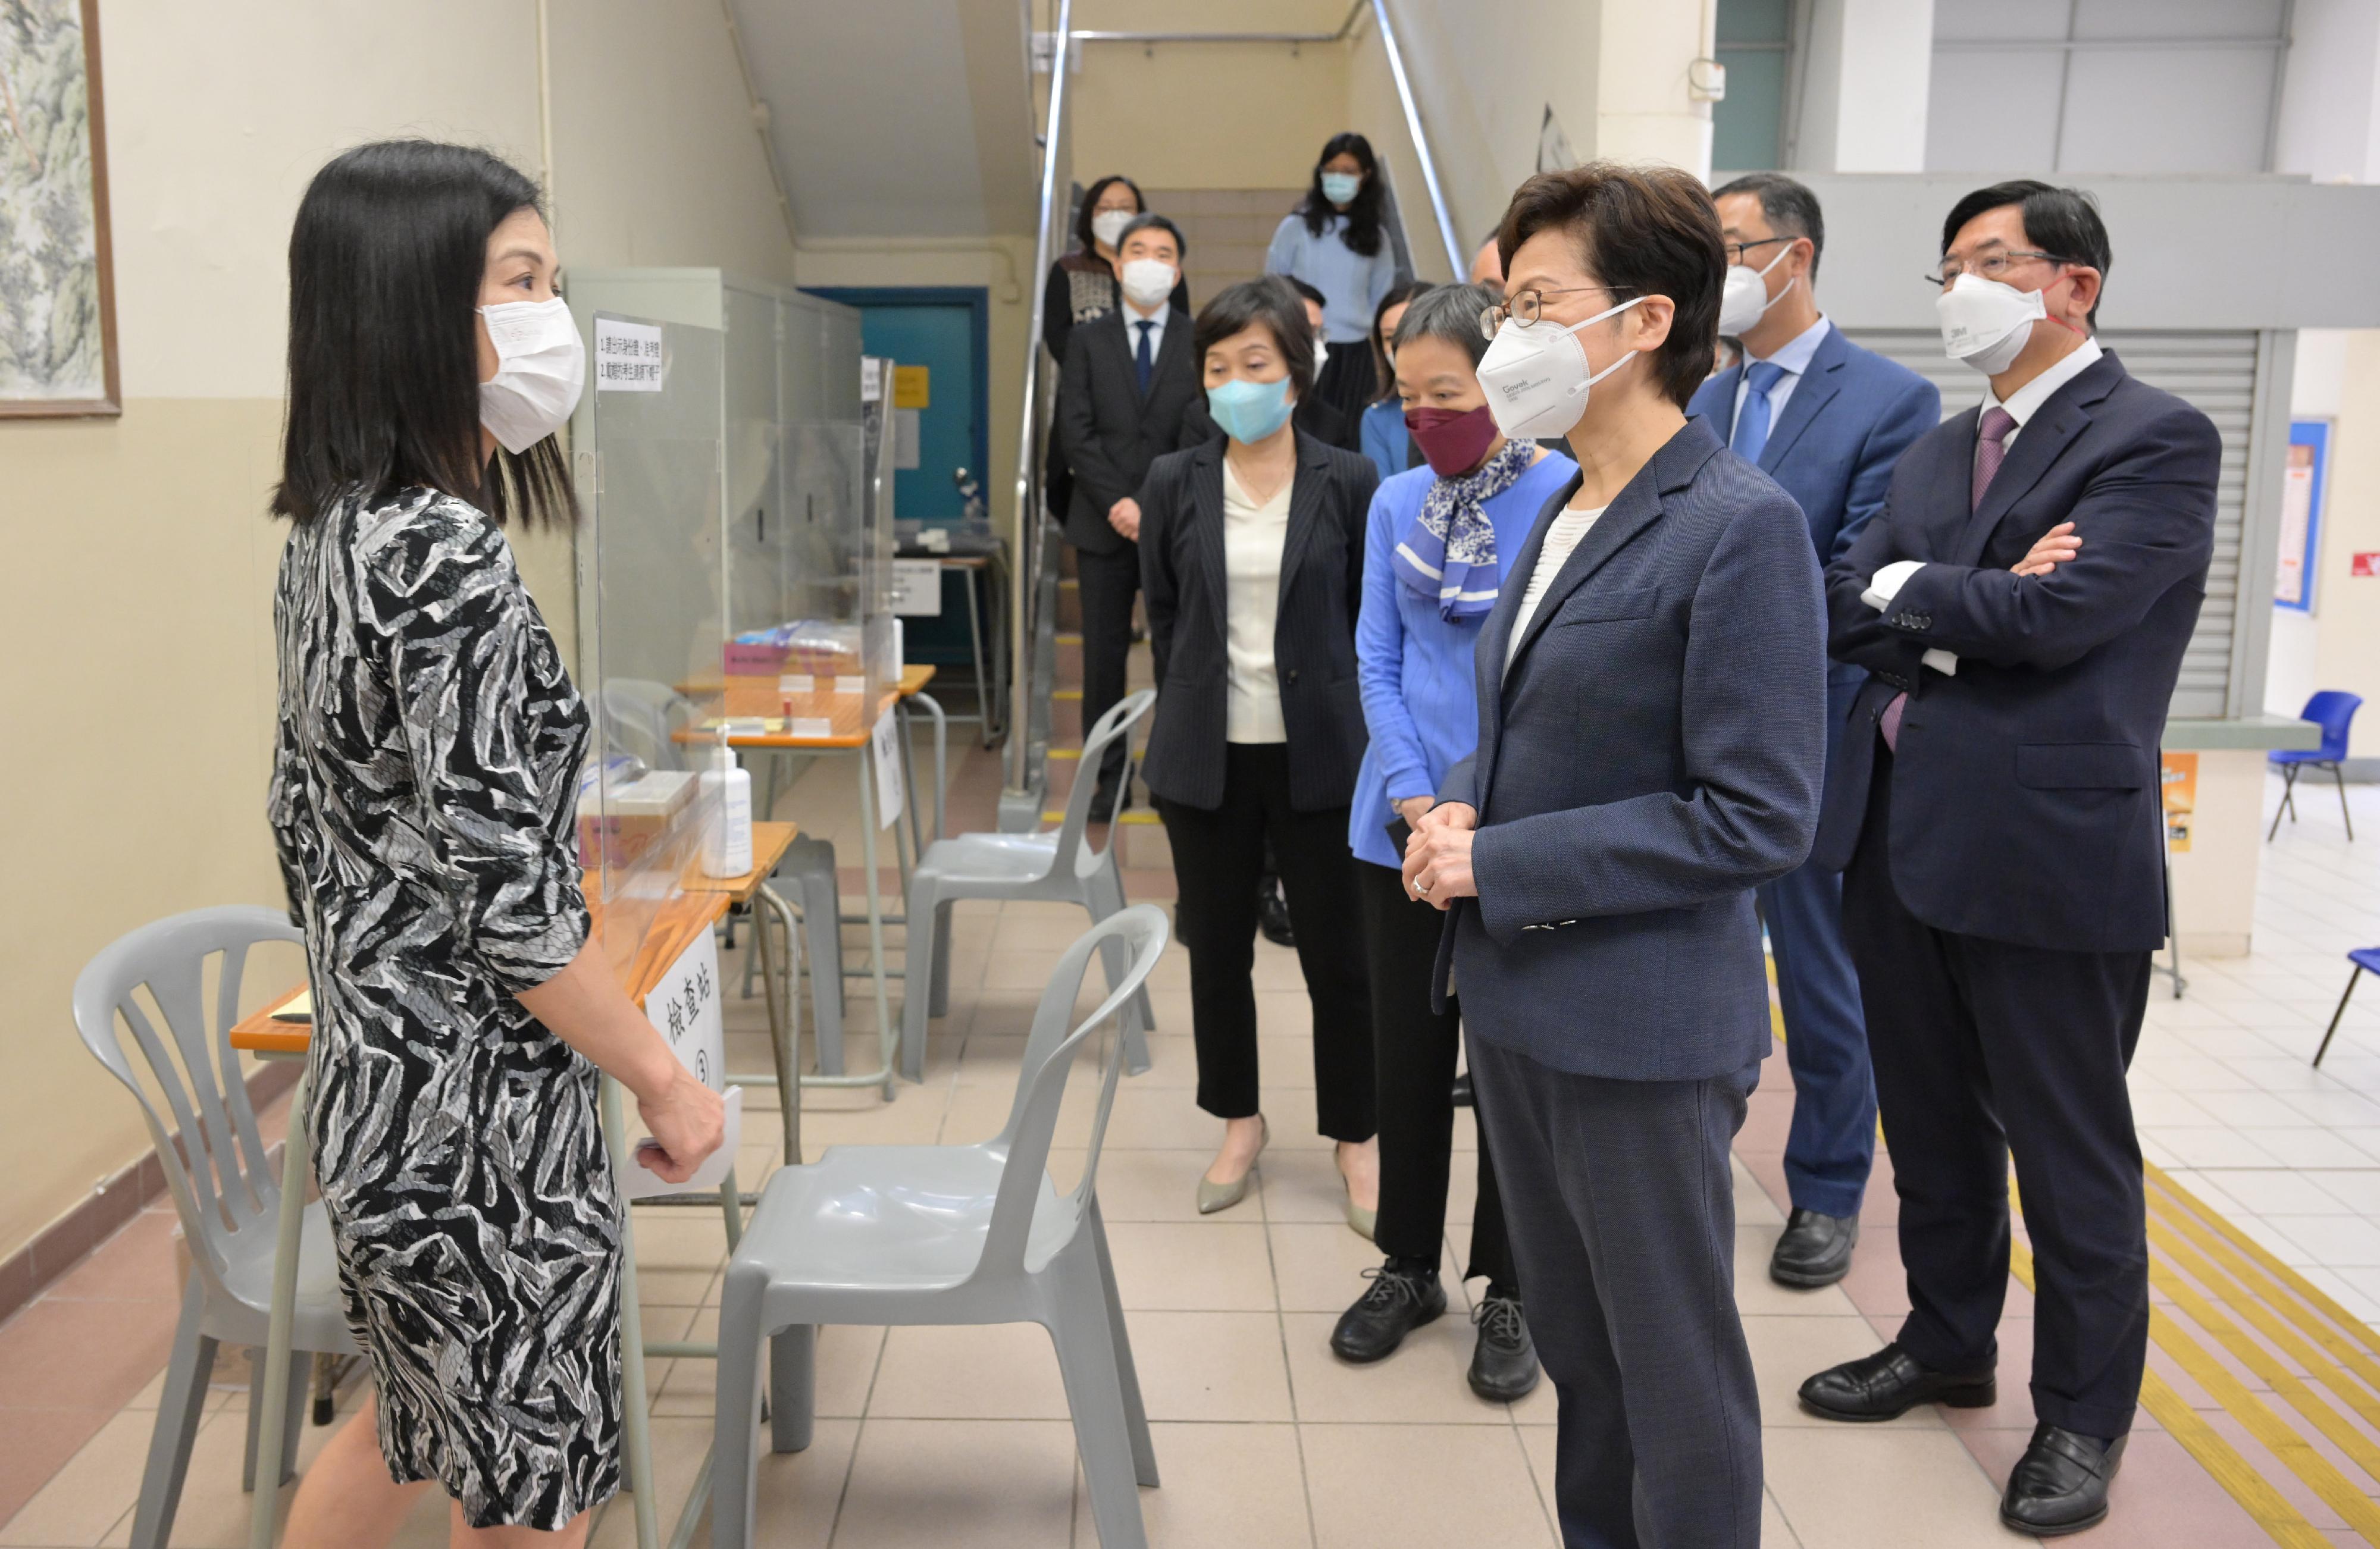 The Chief Executive, Mrs Carrie Lam, today (April 21) visited Clementi Secondary School, one of the examination centres of the Hong Kong Diploma of Secondary Education Examination, to learn more about the anti-epidemic measures in place at the school. Photo shows Mrs Lam (third right) receiving a briefing by the Principal of Clementi Secondary School, Ms Bonnie Lai (first left), on the relevant work. Looking on are the Under Secretary for Education, Dr Choi Yuk-lin (fifth right), and the Chairman of the Hong Kong Examinations and Assessment Authority, Mr Samuel Yung (first right).